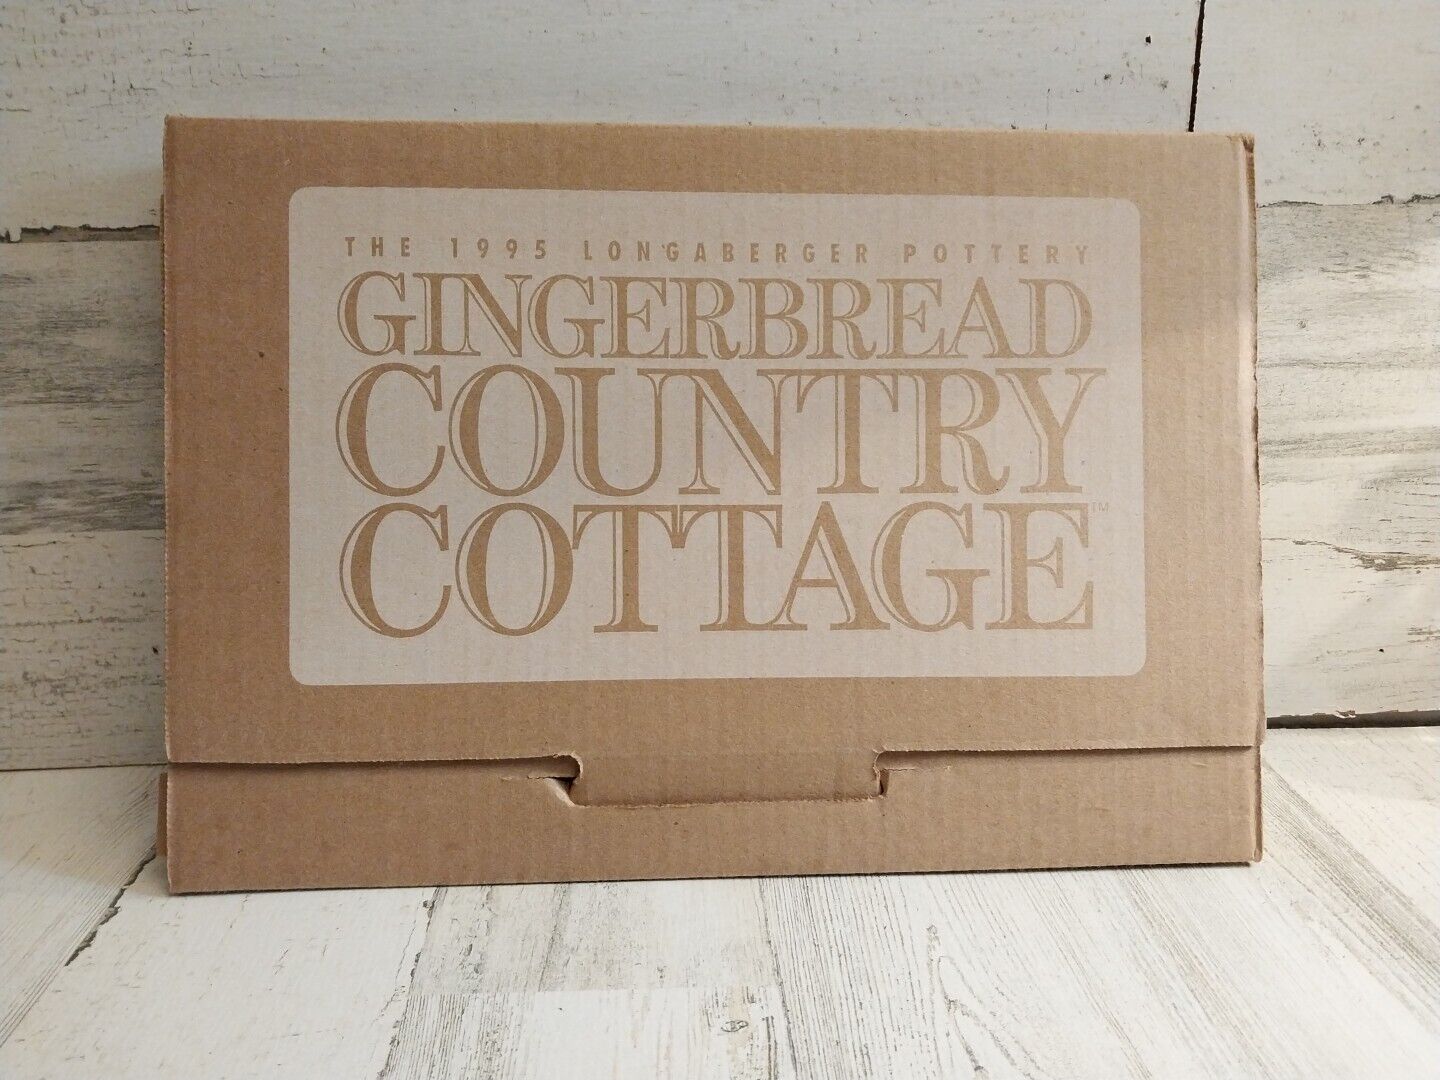 Gingerbread Vtg 1995 Longaberger Pottery  Country Cottage Mold #32476 New